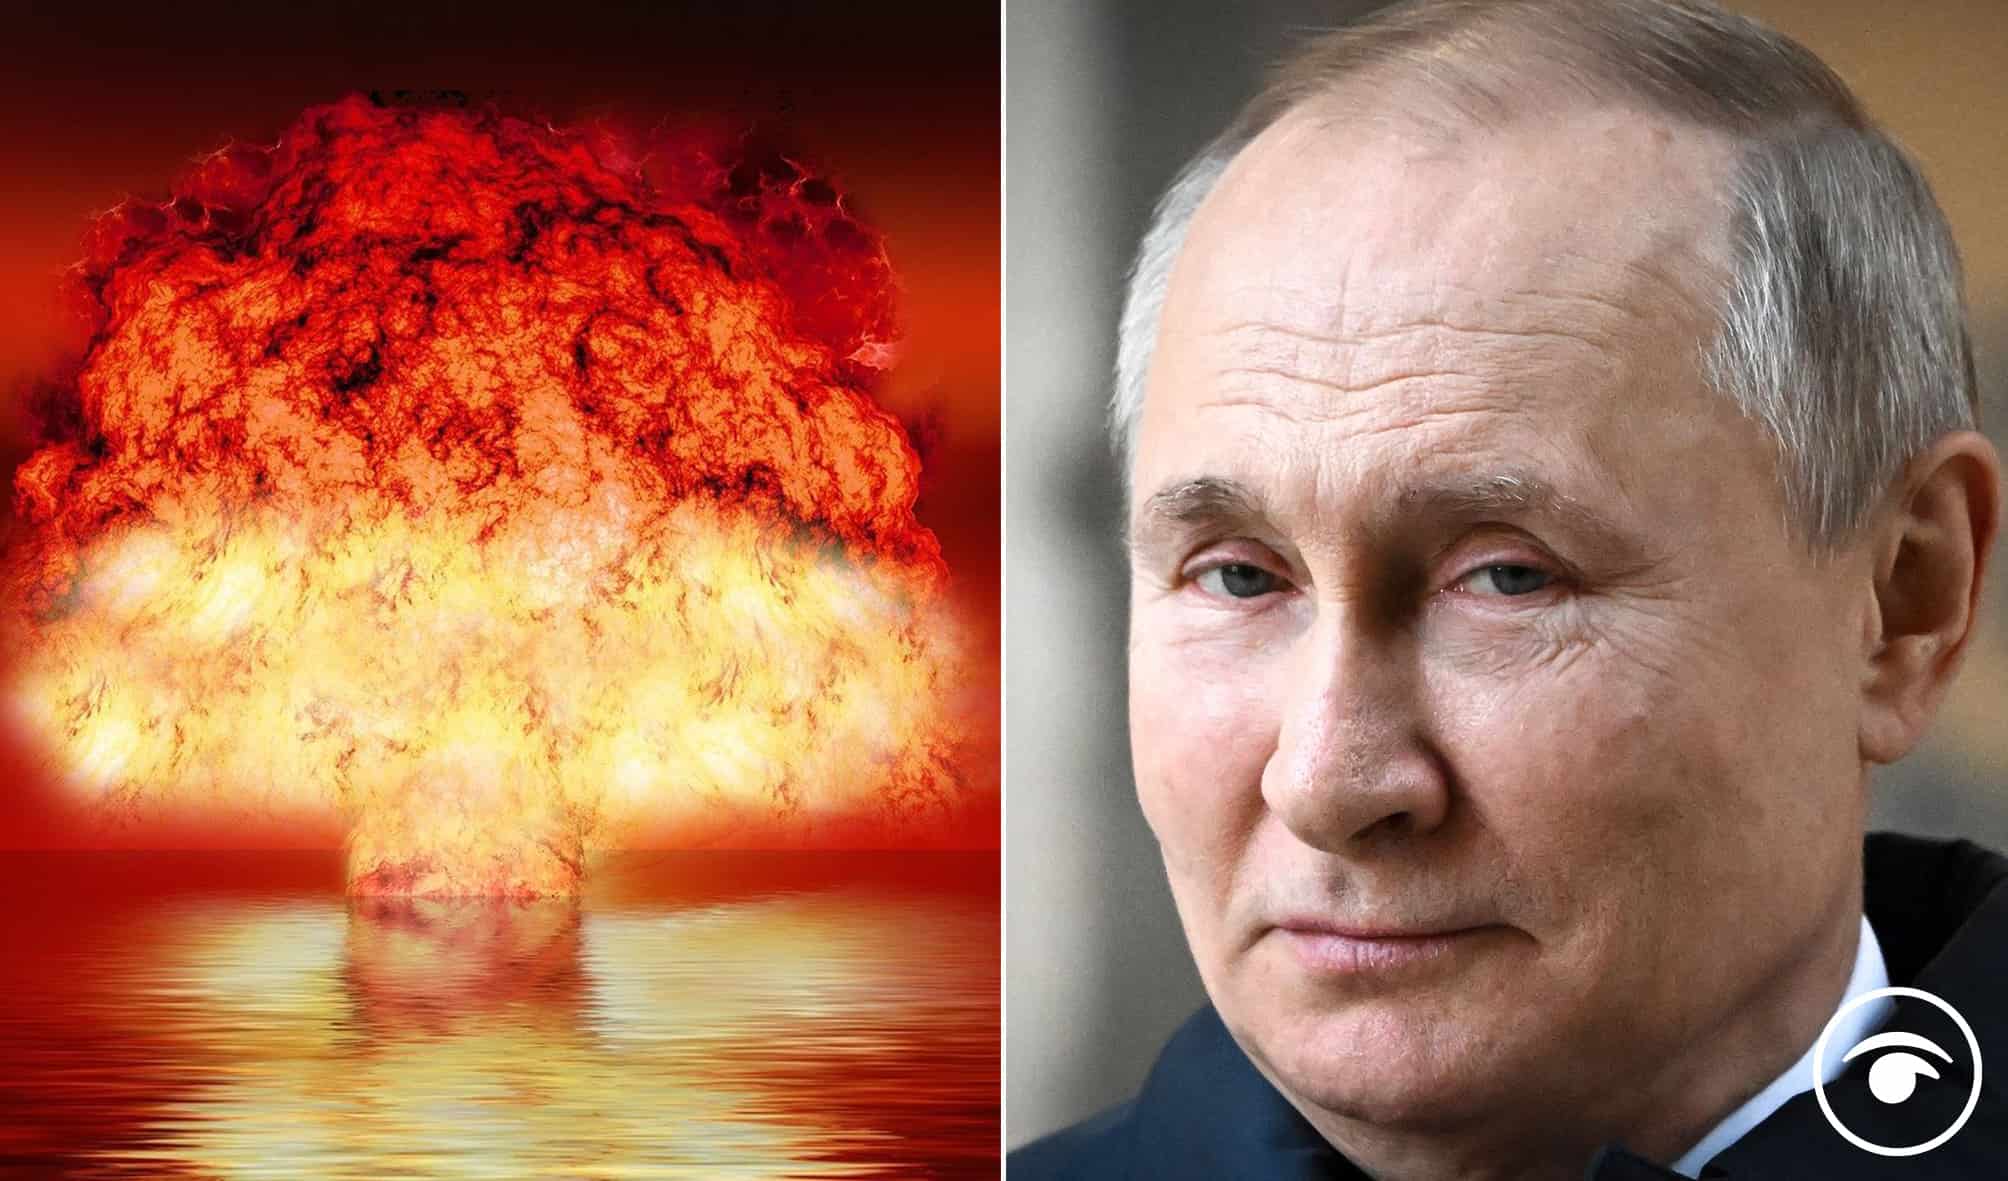 Question on your lips: How likely is it Russia will launch nuclear attack?